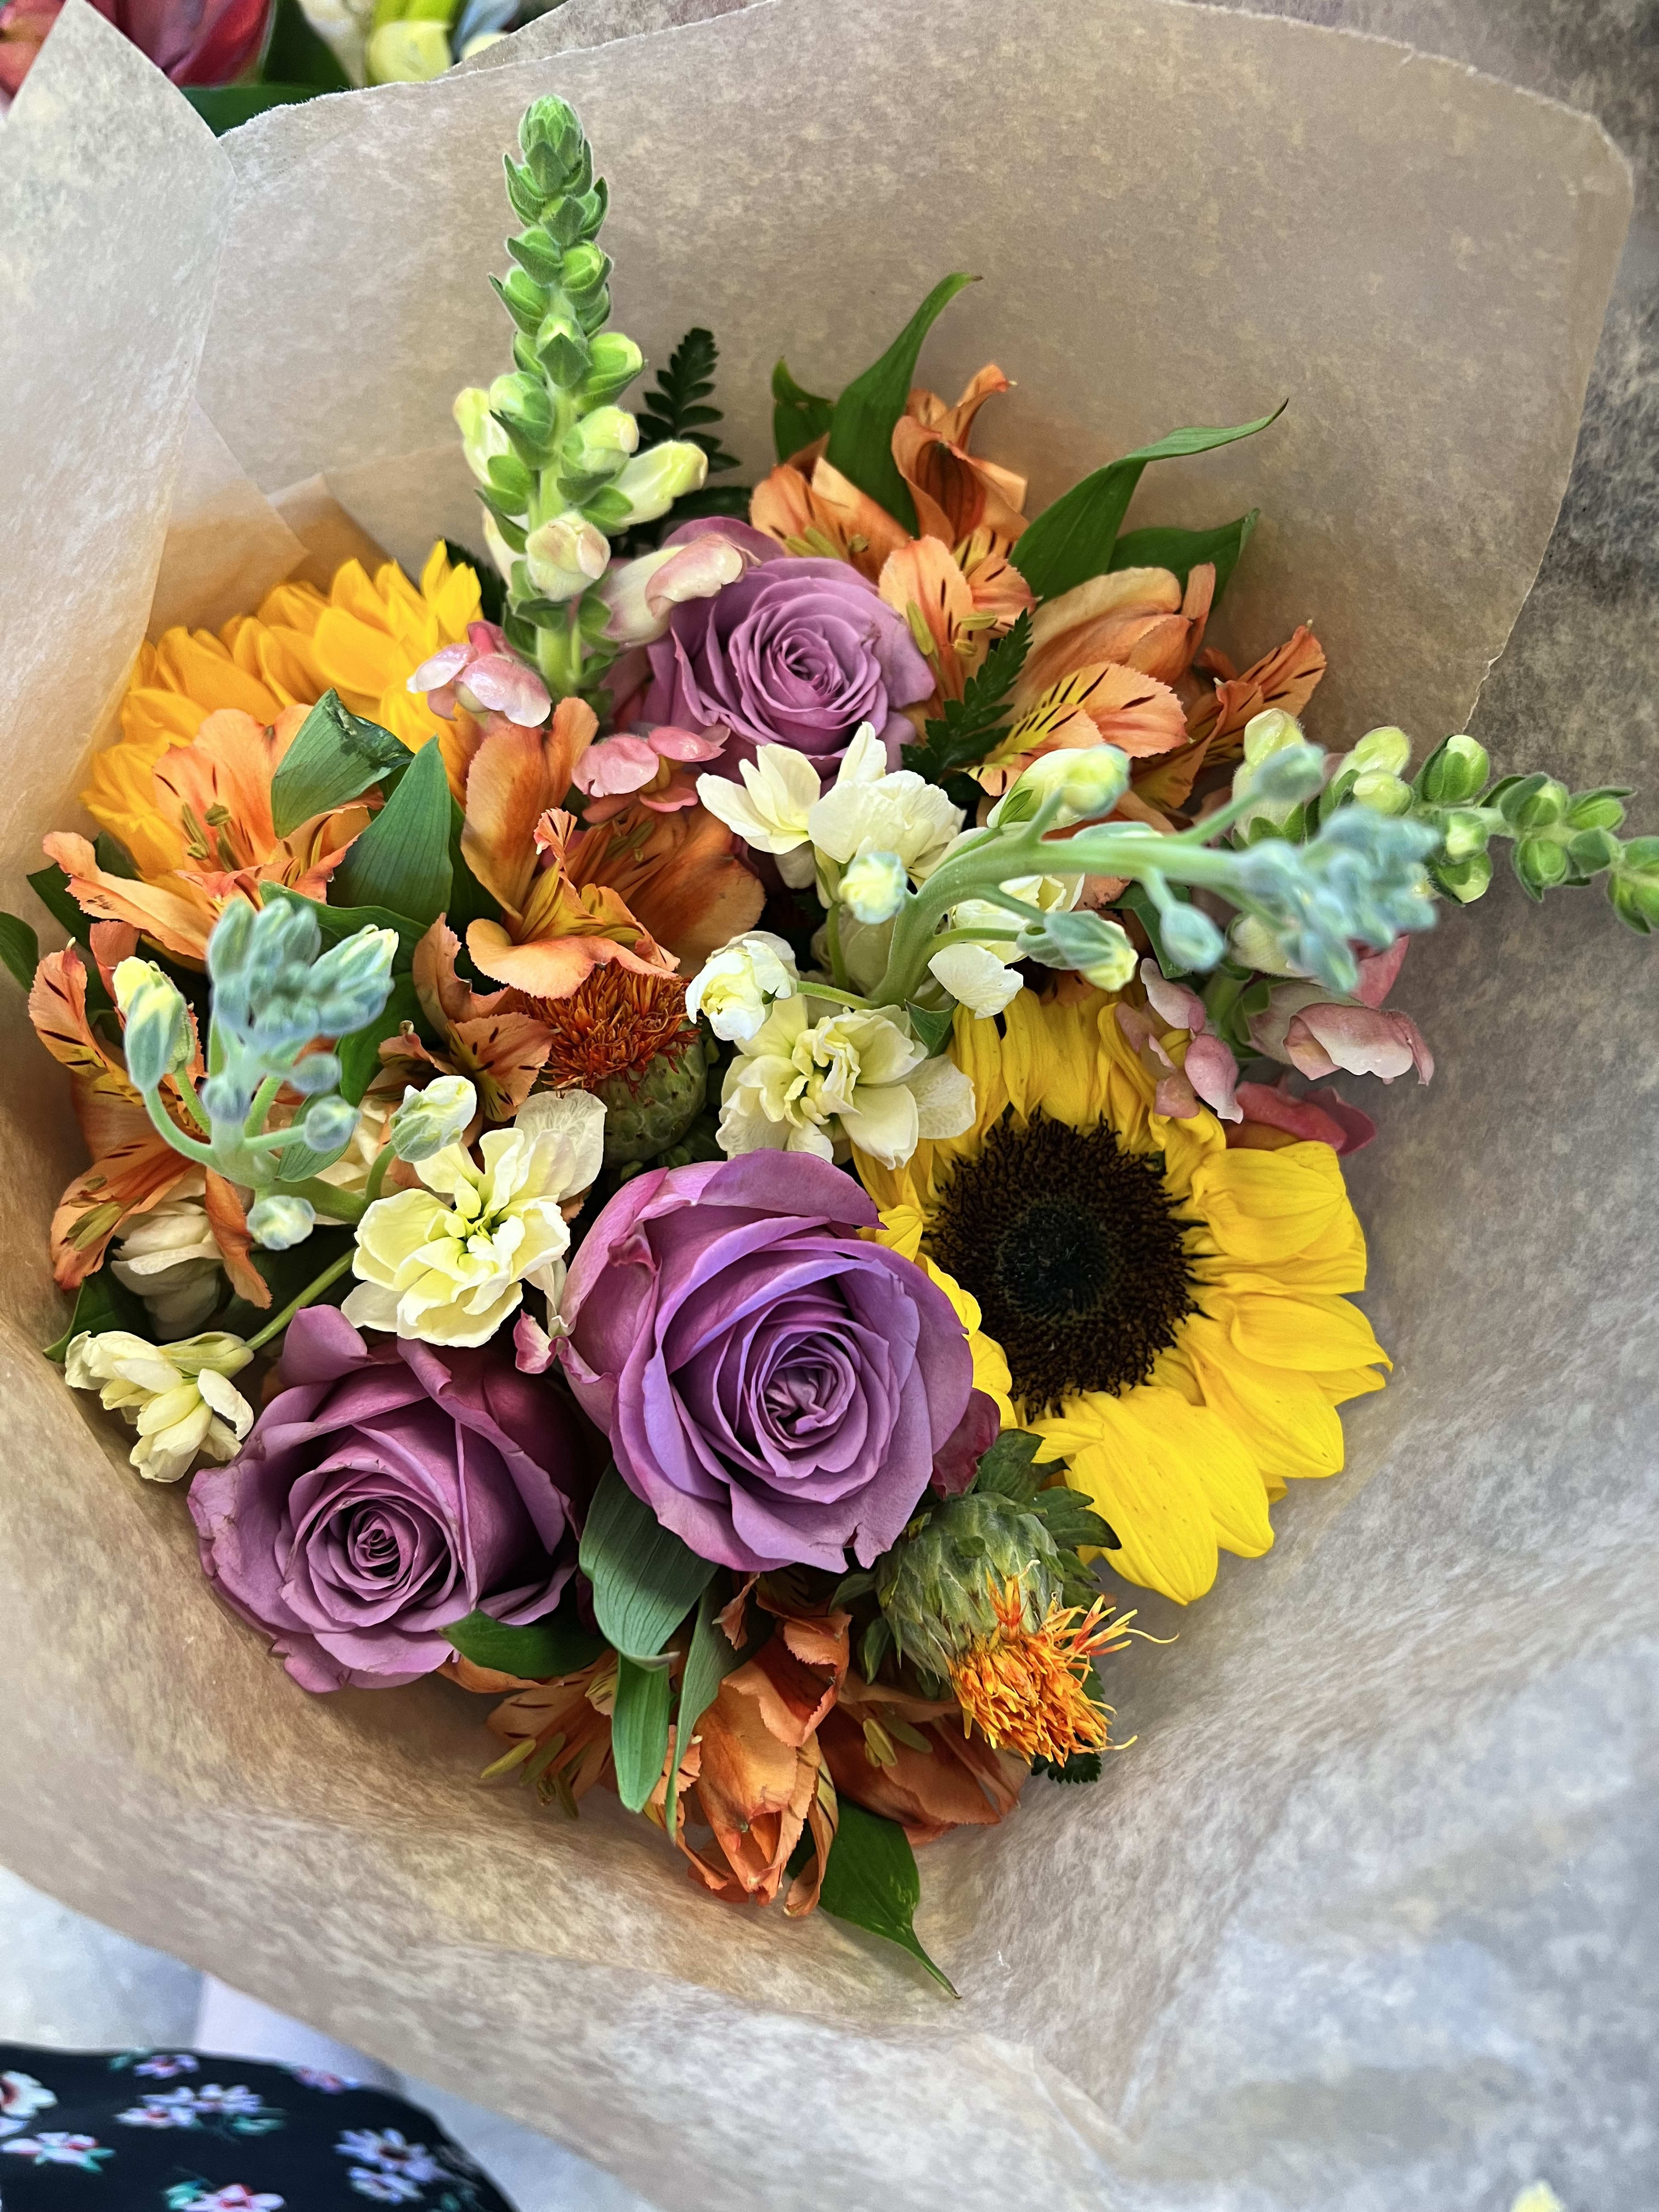 Sunshine wrapped - Assorted flowers wrapped in paper to create an amazing bouquet that you can carry out or have delivered.